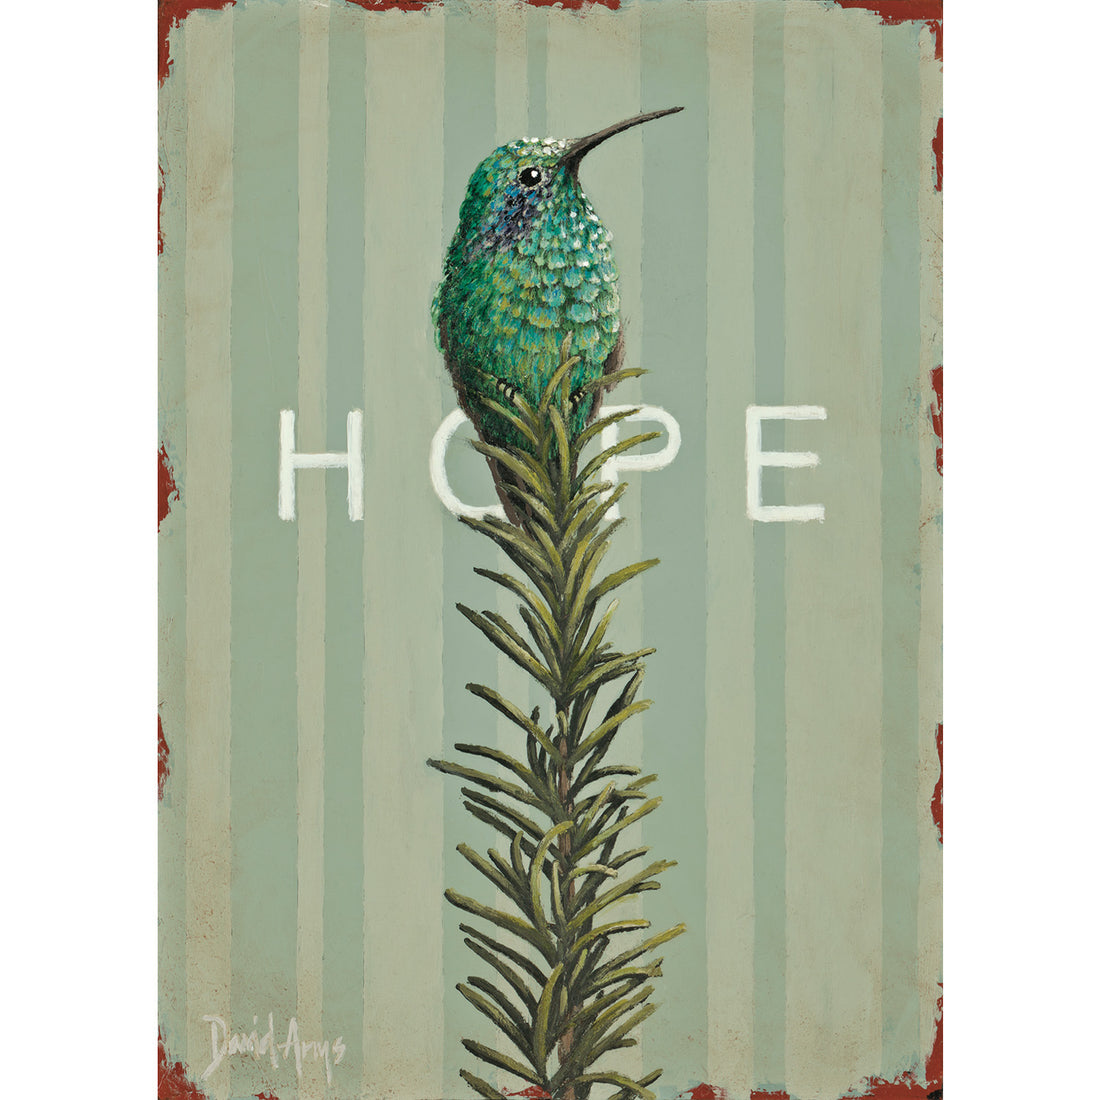 An illustration of a green hummingbird resting on top of a sprig or rosemary over a teal striped background, with &quot;HOPE&quot; printed in white behind the bird.